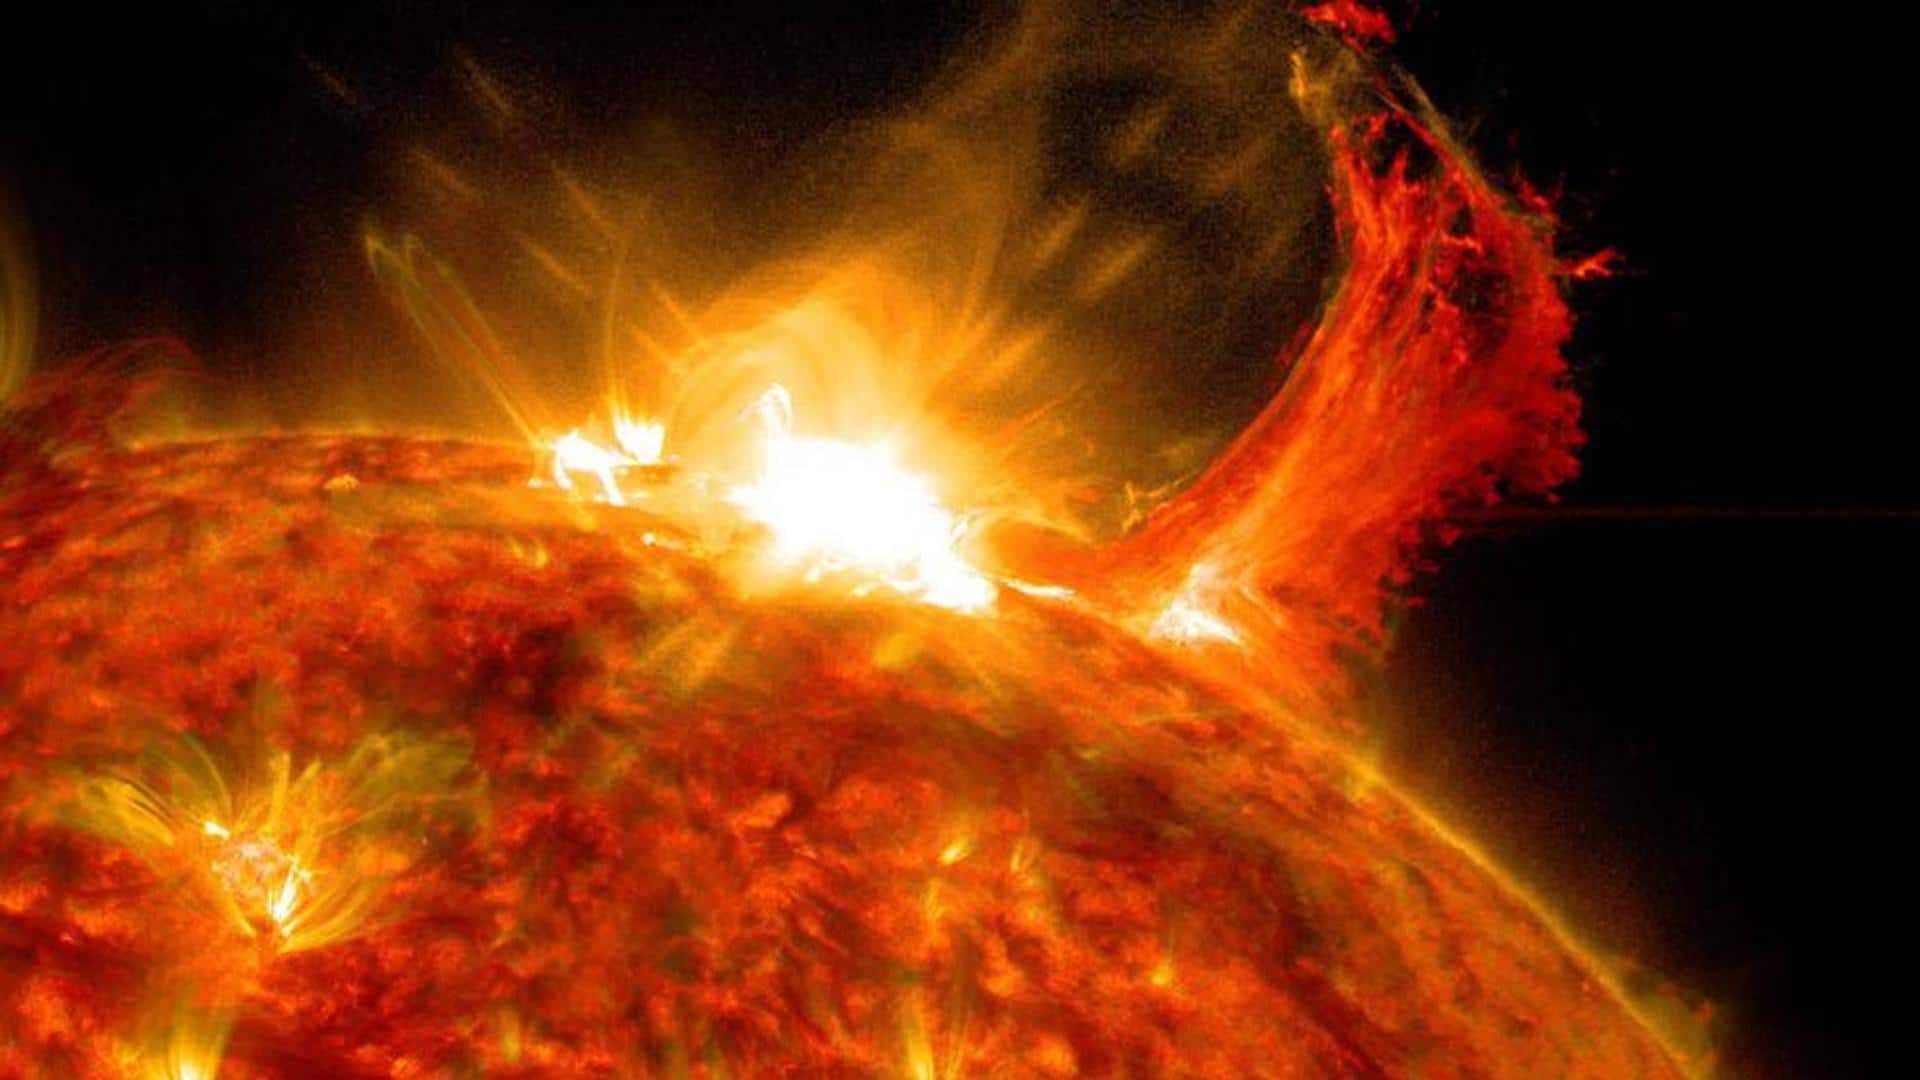 How NASA's AI-powered tool will warn about "dangerous space weather"